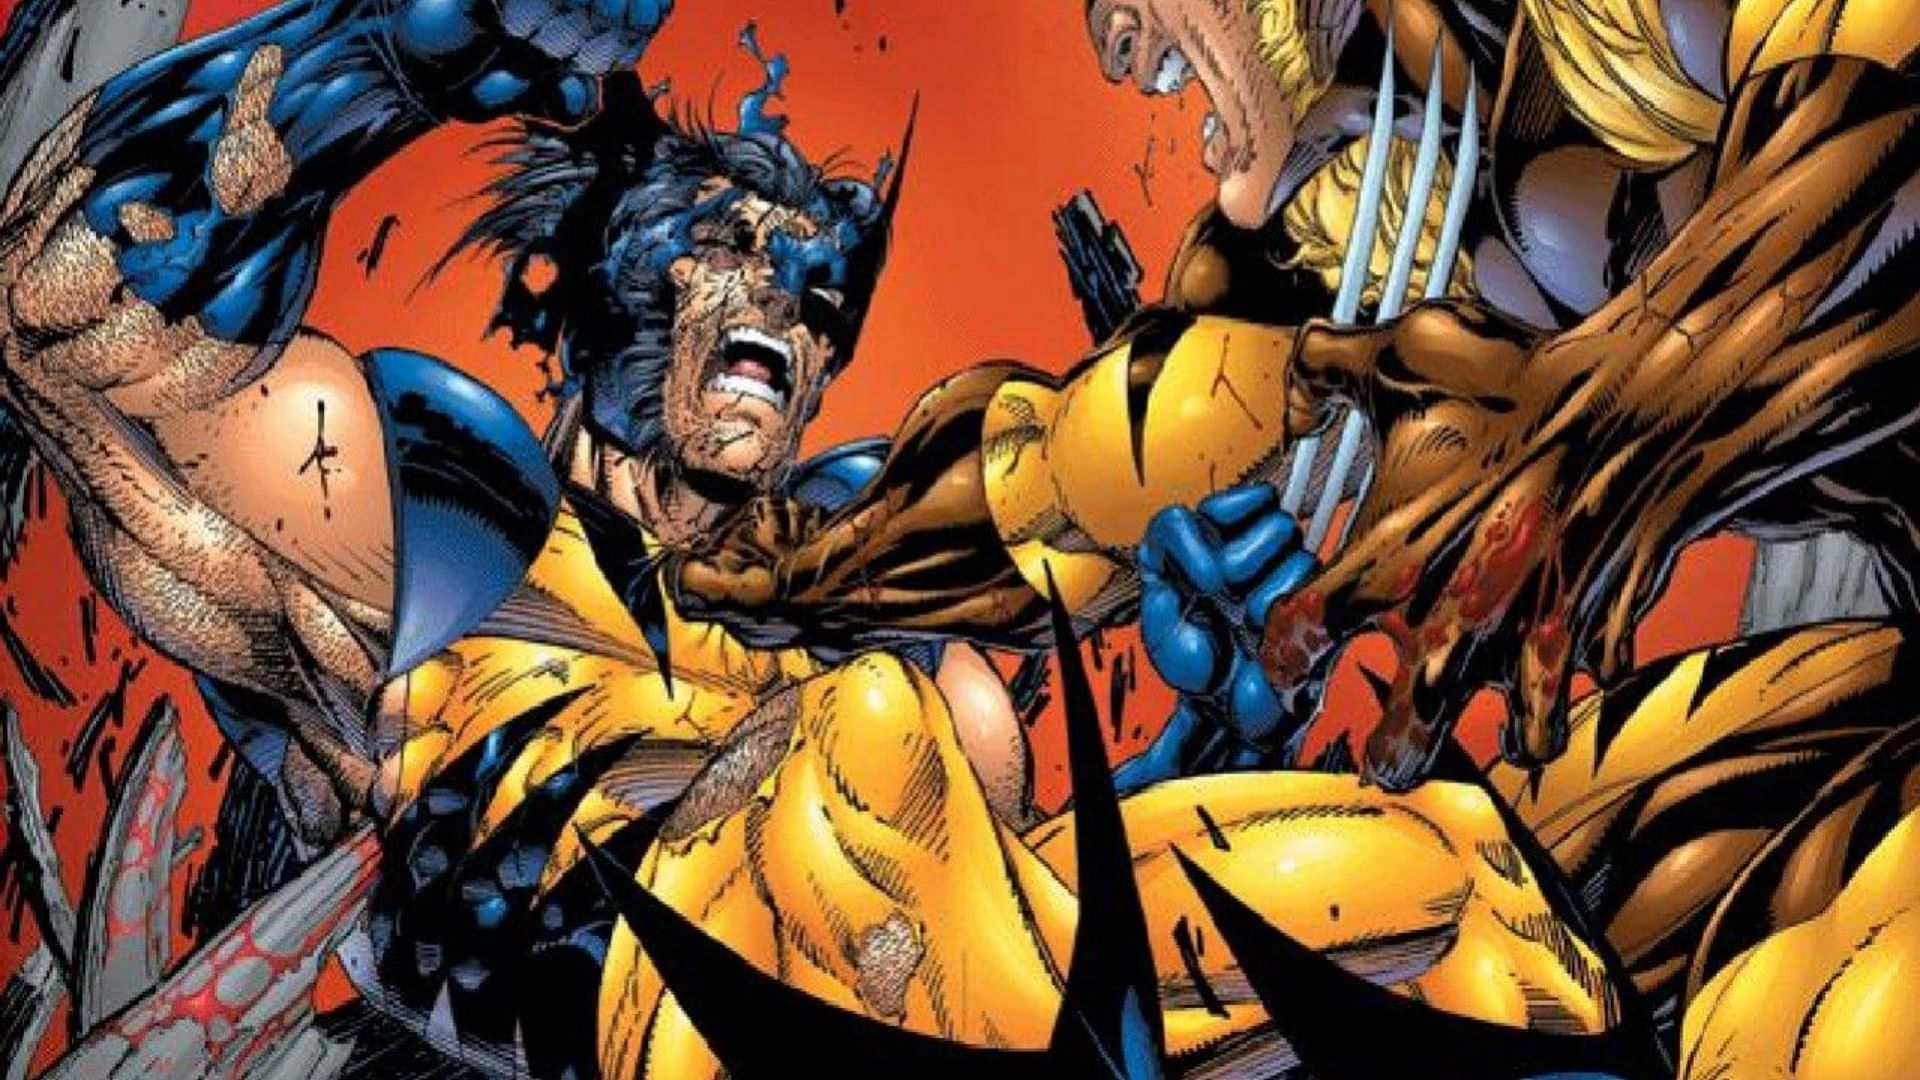 The epic battle between Wolverine and Sabretooth in Uncanny X-Men #10 is widely hailed as one of the most legendary battles in Marvel Comics. (Image Via Marvel)